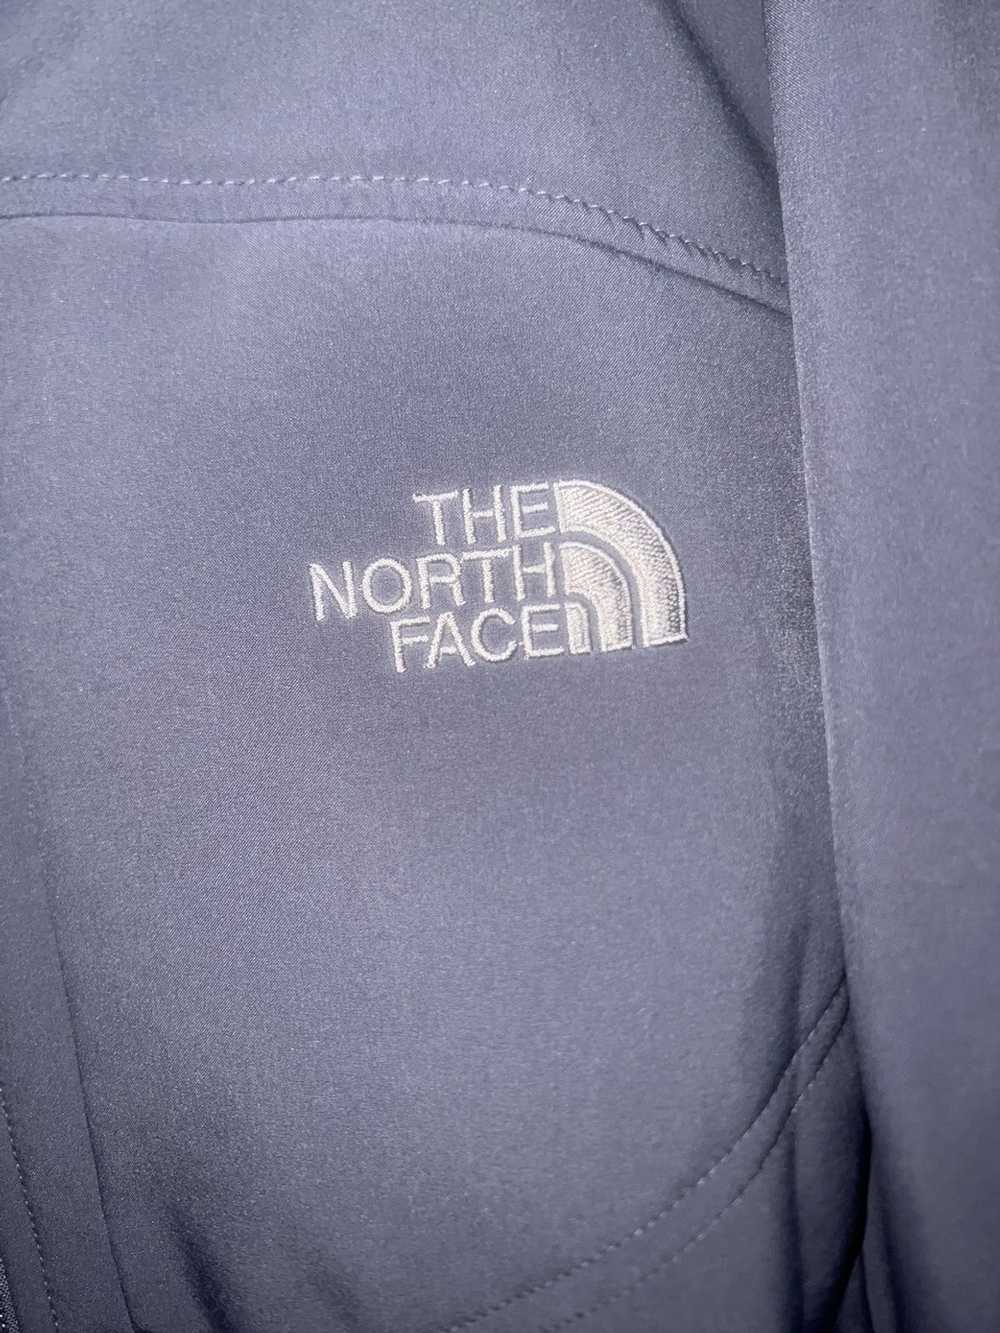 The North Face Purple North Face Shell Jacket - image 3